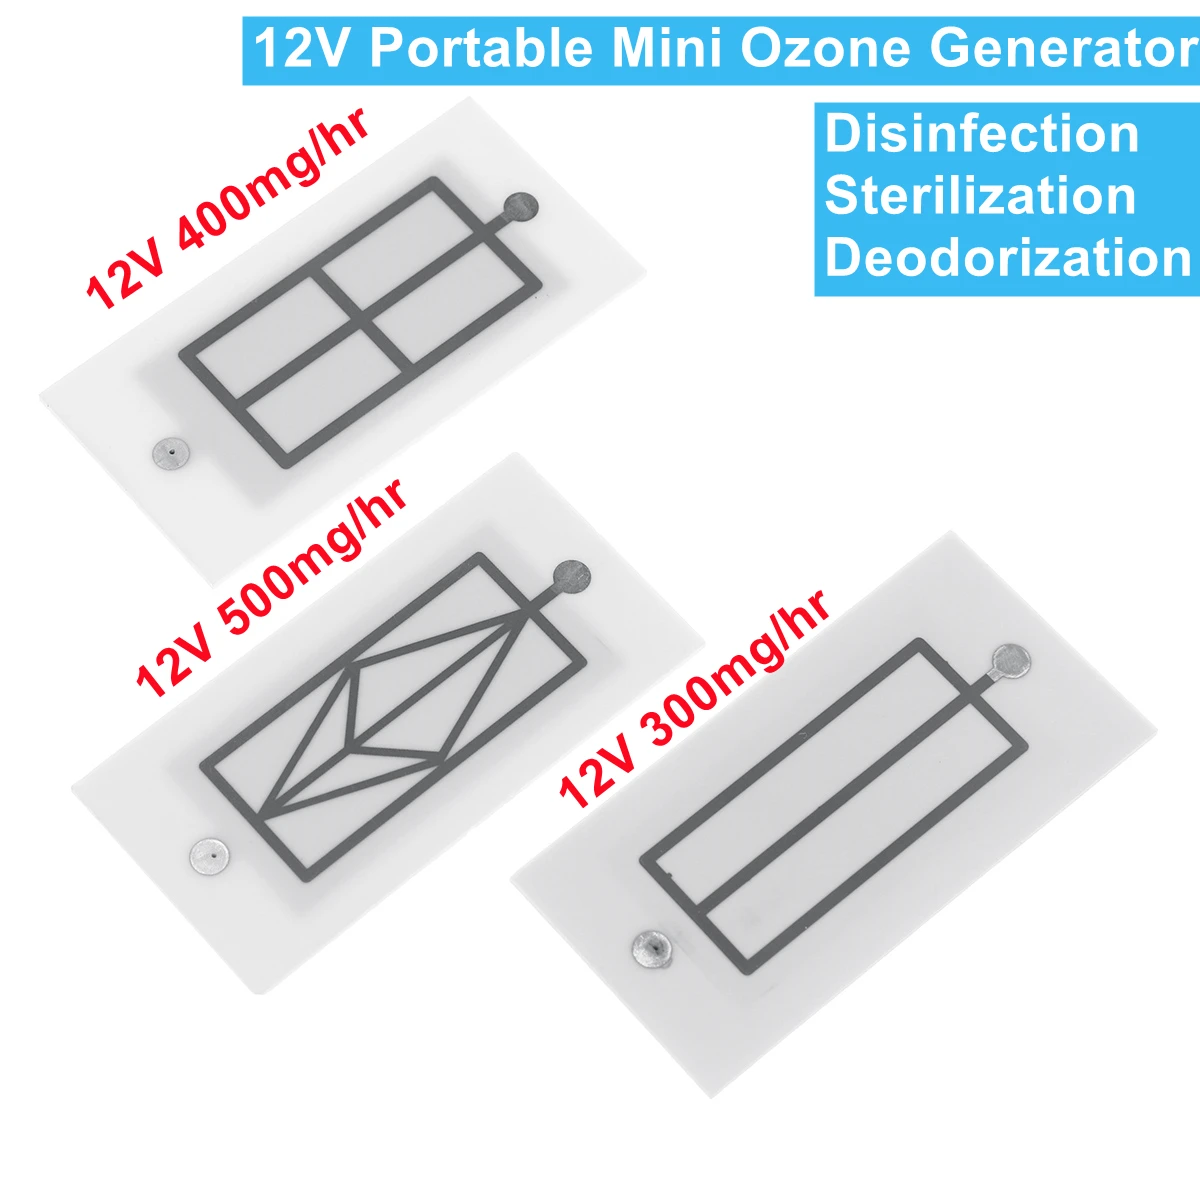 12V Portable Mini Ozone Generator 500/400/300mg Integrated Ceramic Plate Ozonizer Air Water Cleaner Air Purifier Accessories 10g h dc12v ac220v portable ozone generator integrated ceramic ozonizer car air water sterilization purifier parts home industry